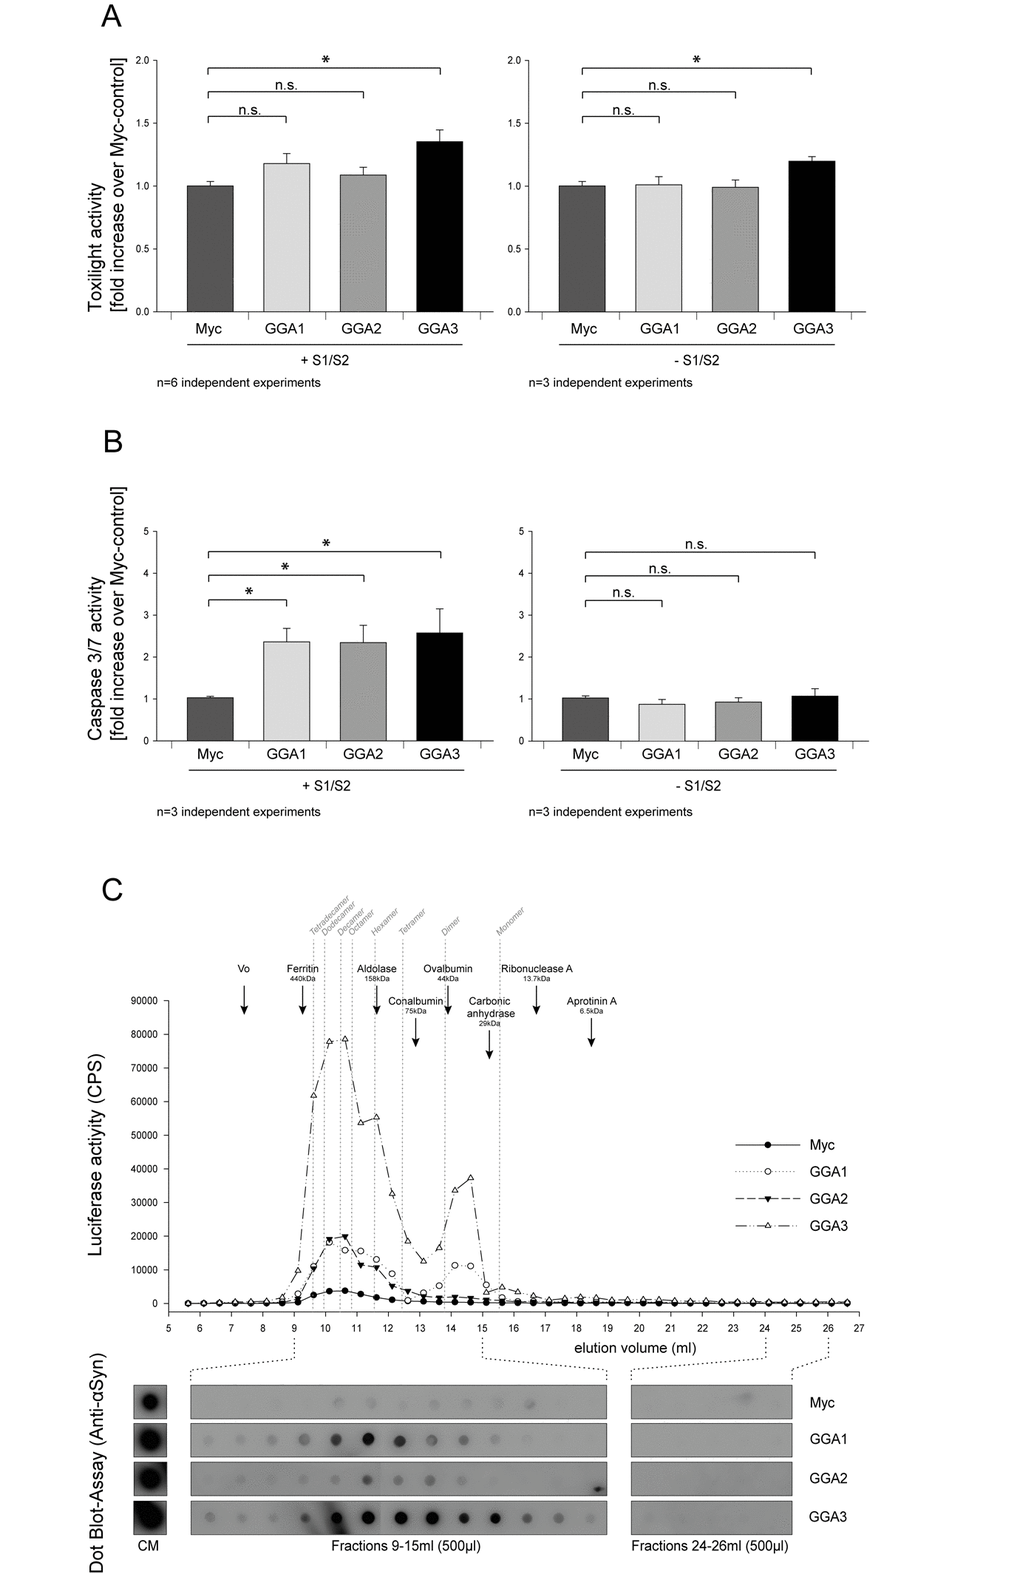 GGA modifies secreted α-syn oligomer species and exacerbates extracellular α-syn toxicity. GGA1, 2, 3 or myc control were expressed alone or with S1 and S2 in N2A cells. Then, 48h after transfection, conditioned media were collected and analyzed for increased cytotoxicity using the ToxiLight assay (Lonza). Neither GGA1 nor GGA2 co-expression with S1 and S2 showed enhanced toxicity compared to myc-control whereas a slight increase was observed upon GGA3 expression (A, left panel). The mean fold change over control ±SEM of n=6 independent experiments is shown. To test for the GGA-dependent increase in cytotoxicity, GGA1, 2, 3 or myc control were expressed without S1/ S2 in N2A cells. GGA3 expression slightly increased toxicity compared to control, GGA1 and GGA2 (A, right panel). The mean fold change over control ±SEM of n=3 independent experiments is shown. Statistical analysis was performed using Kruskal-Wallis one-way ANOVA on ranks followed by multiple comparisons versus control group (Dunn's Method) with *=pB, left panel). In contrast, CM from N2A overexpressing GGA1, 2, 3 or myc control alone had no influence on Caspase 3/7 activity (B, right panel). These findings indicate that GGA not only alters the amount of secreted α-synuclein oligomers but also the quality of oligomeric species in the conditioned media. The mean fold change over control ±SEM of n=3 independent experiments is shown. Statistical analysis was performed using Kruskal-Wallis one-way ANOVA on ranks followed by multiple comparisons versus control group (Dunn's Method) with *=pC). GGA co-expression increased extracellular α-syn dimers but also multimers. These results support the idea that co-expression of GGAs change α-syn oligomer formation, species and secretion.